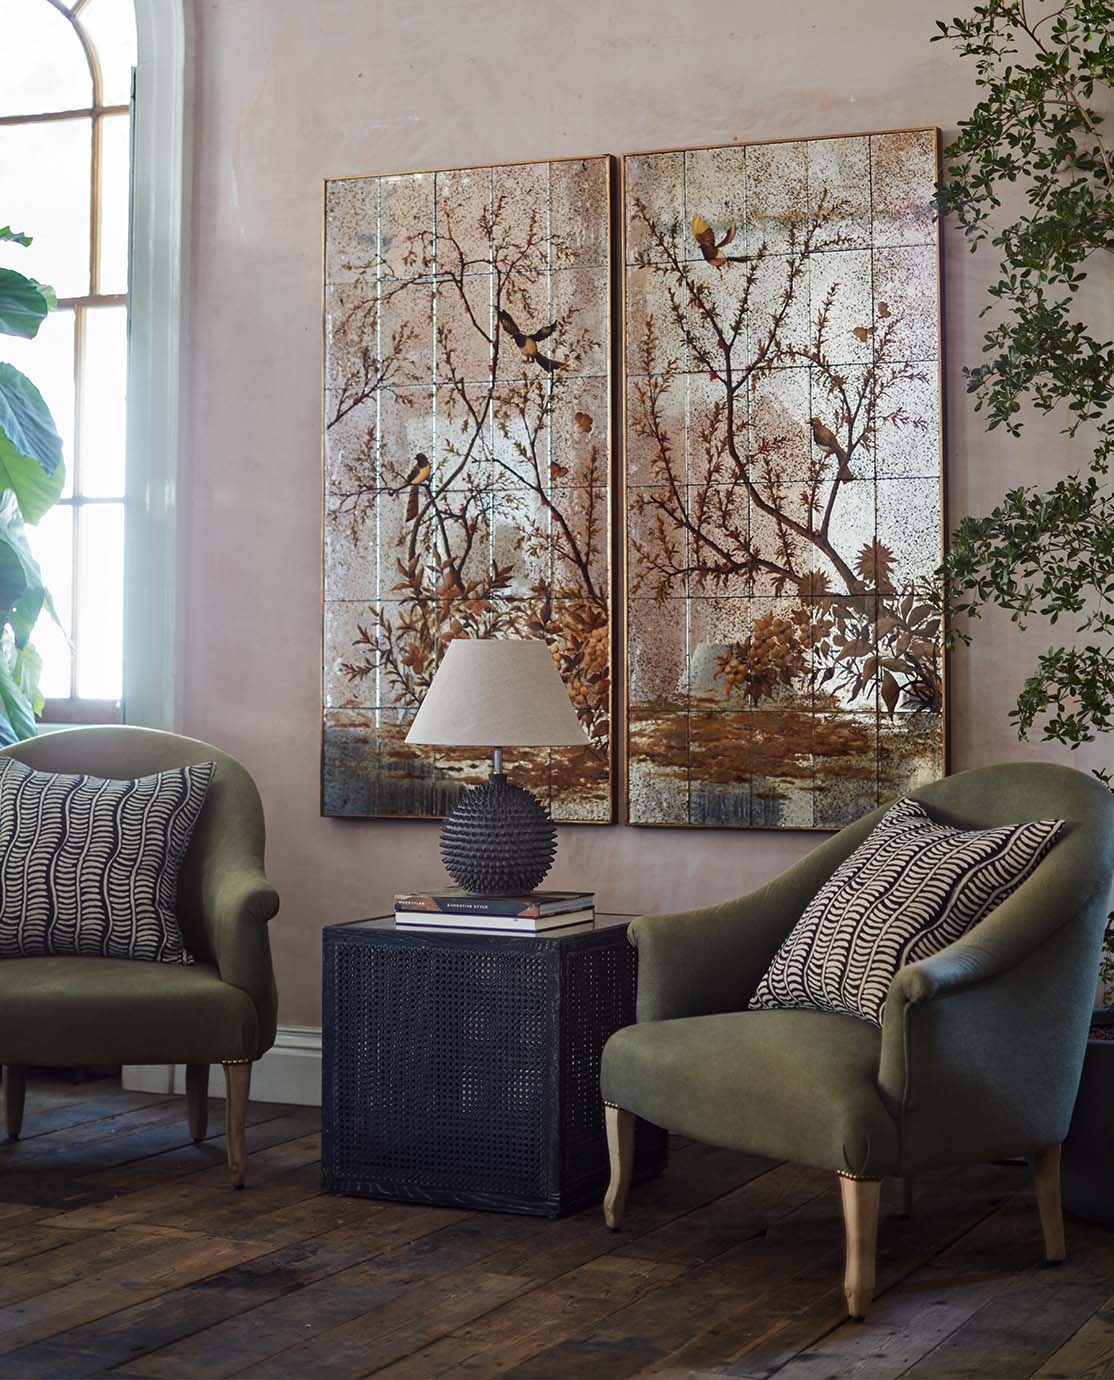 Two mirrored artworks hang above a pair of green armchairs